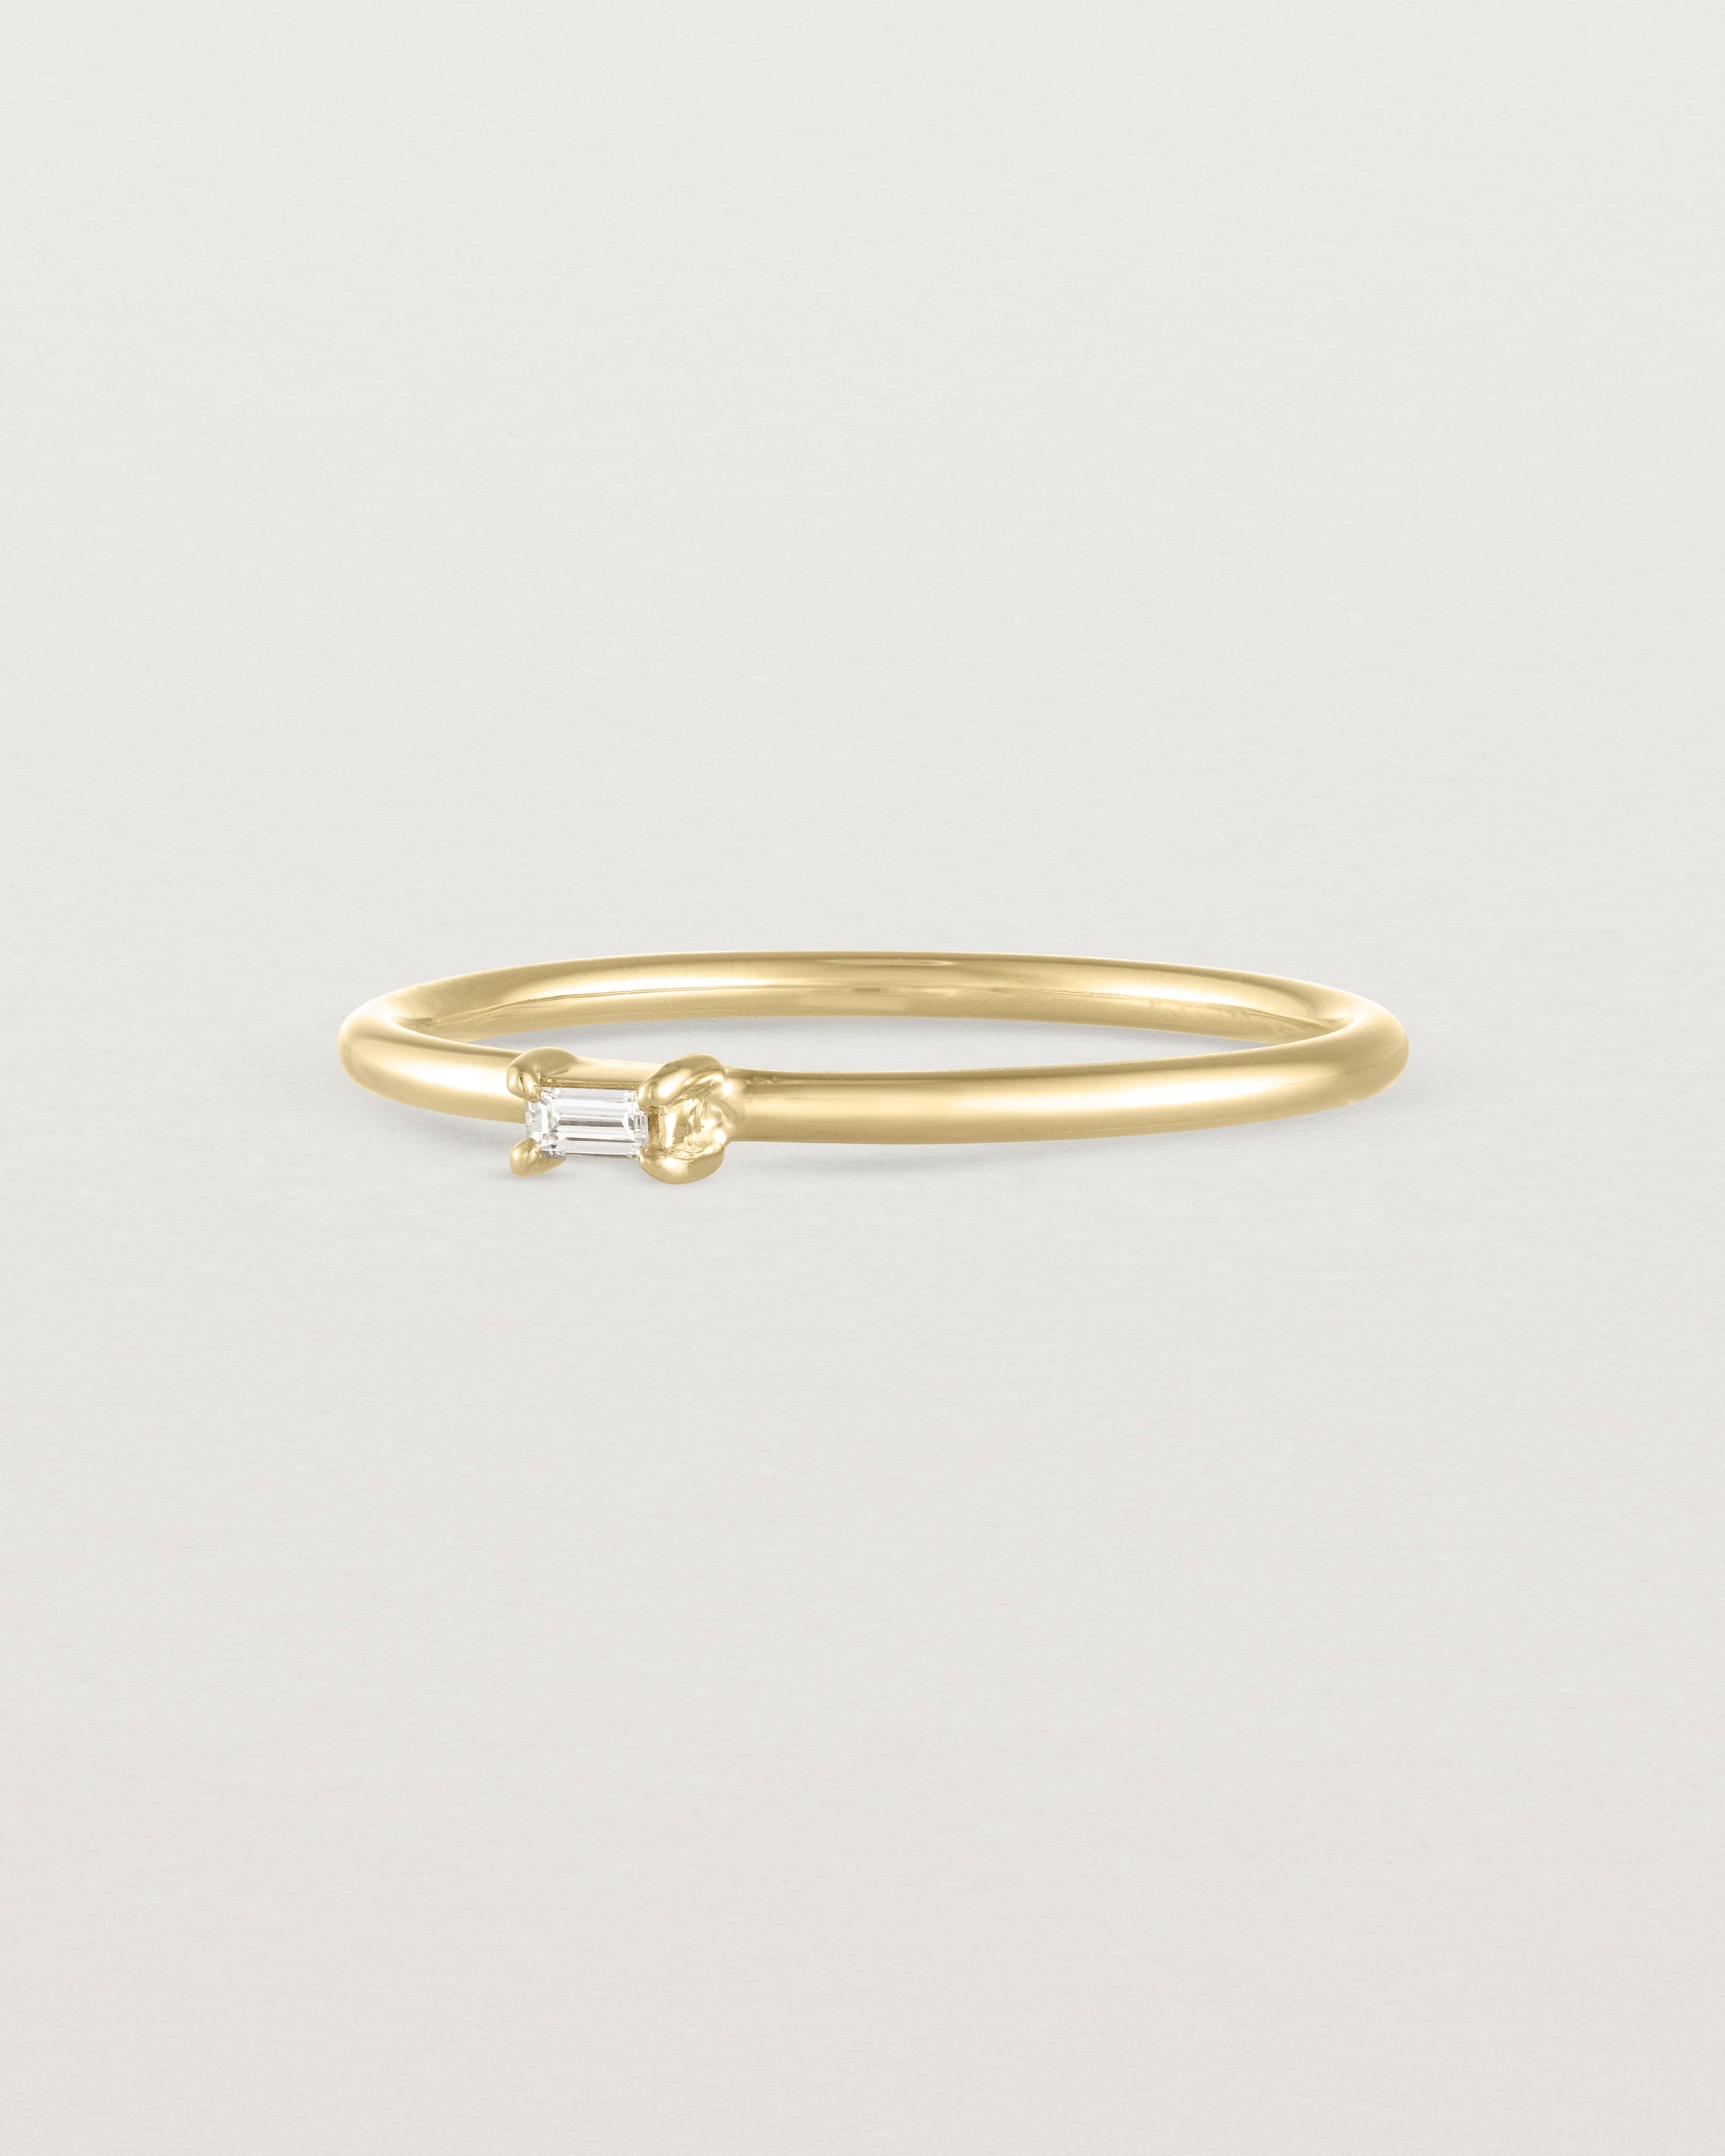 Angled view of the Sena Stacking Ring | Diamond in yellow gold.